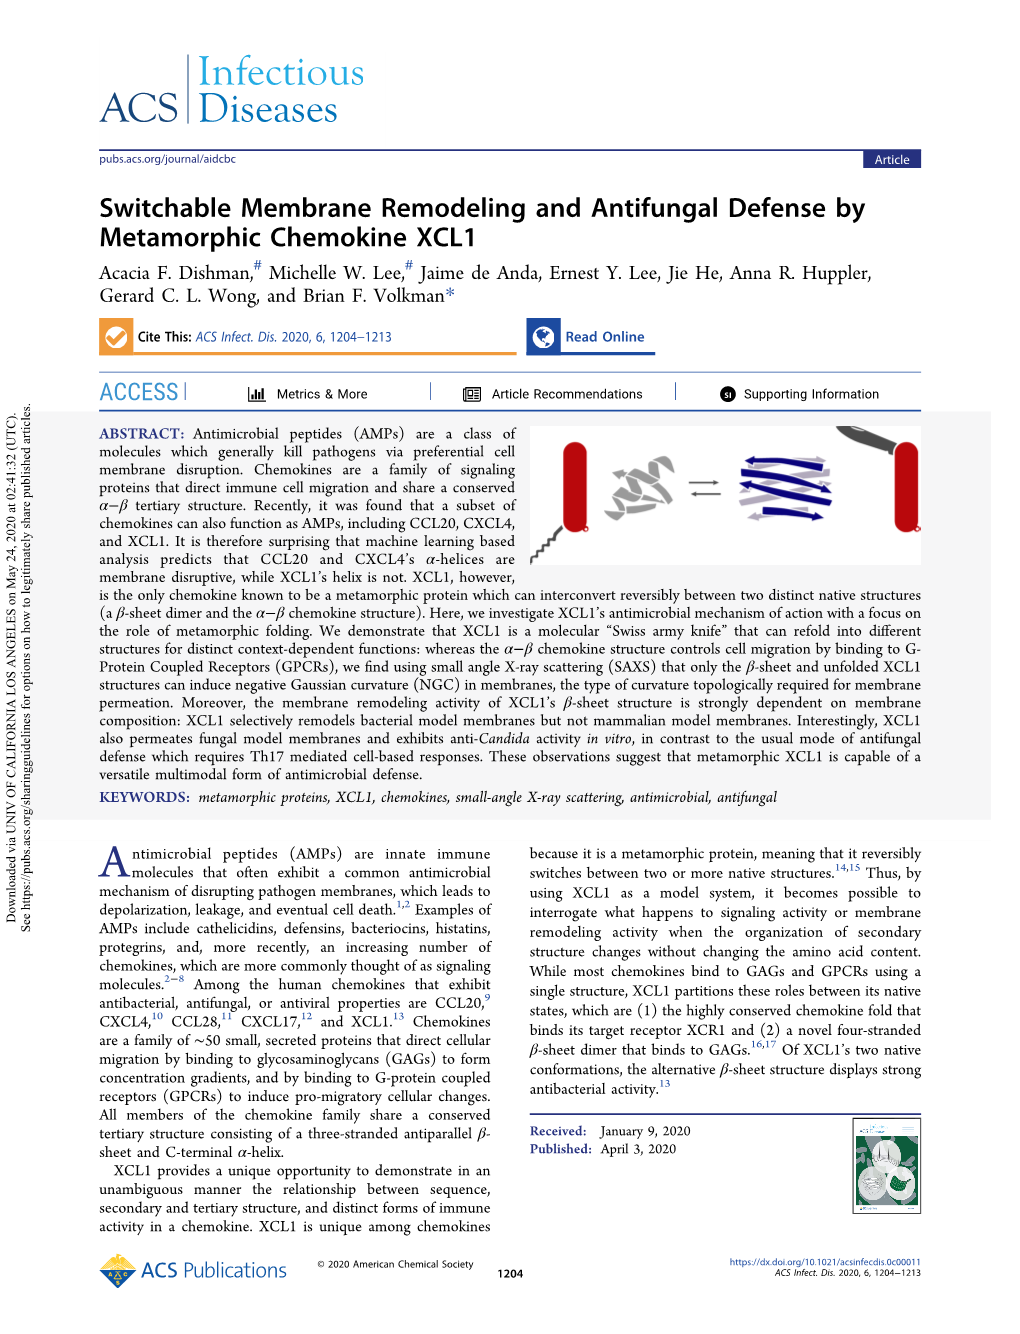 Switchable Membrane Remodeling and Antifungal Defense by Metamorphic Chemokine XCL1 # # Acacia F